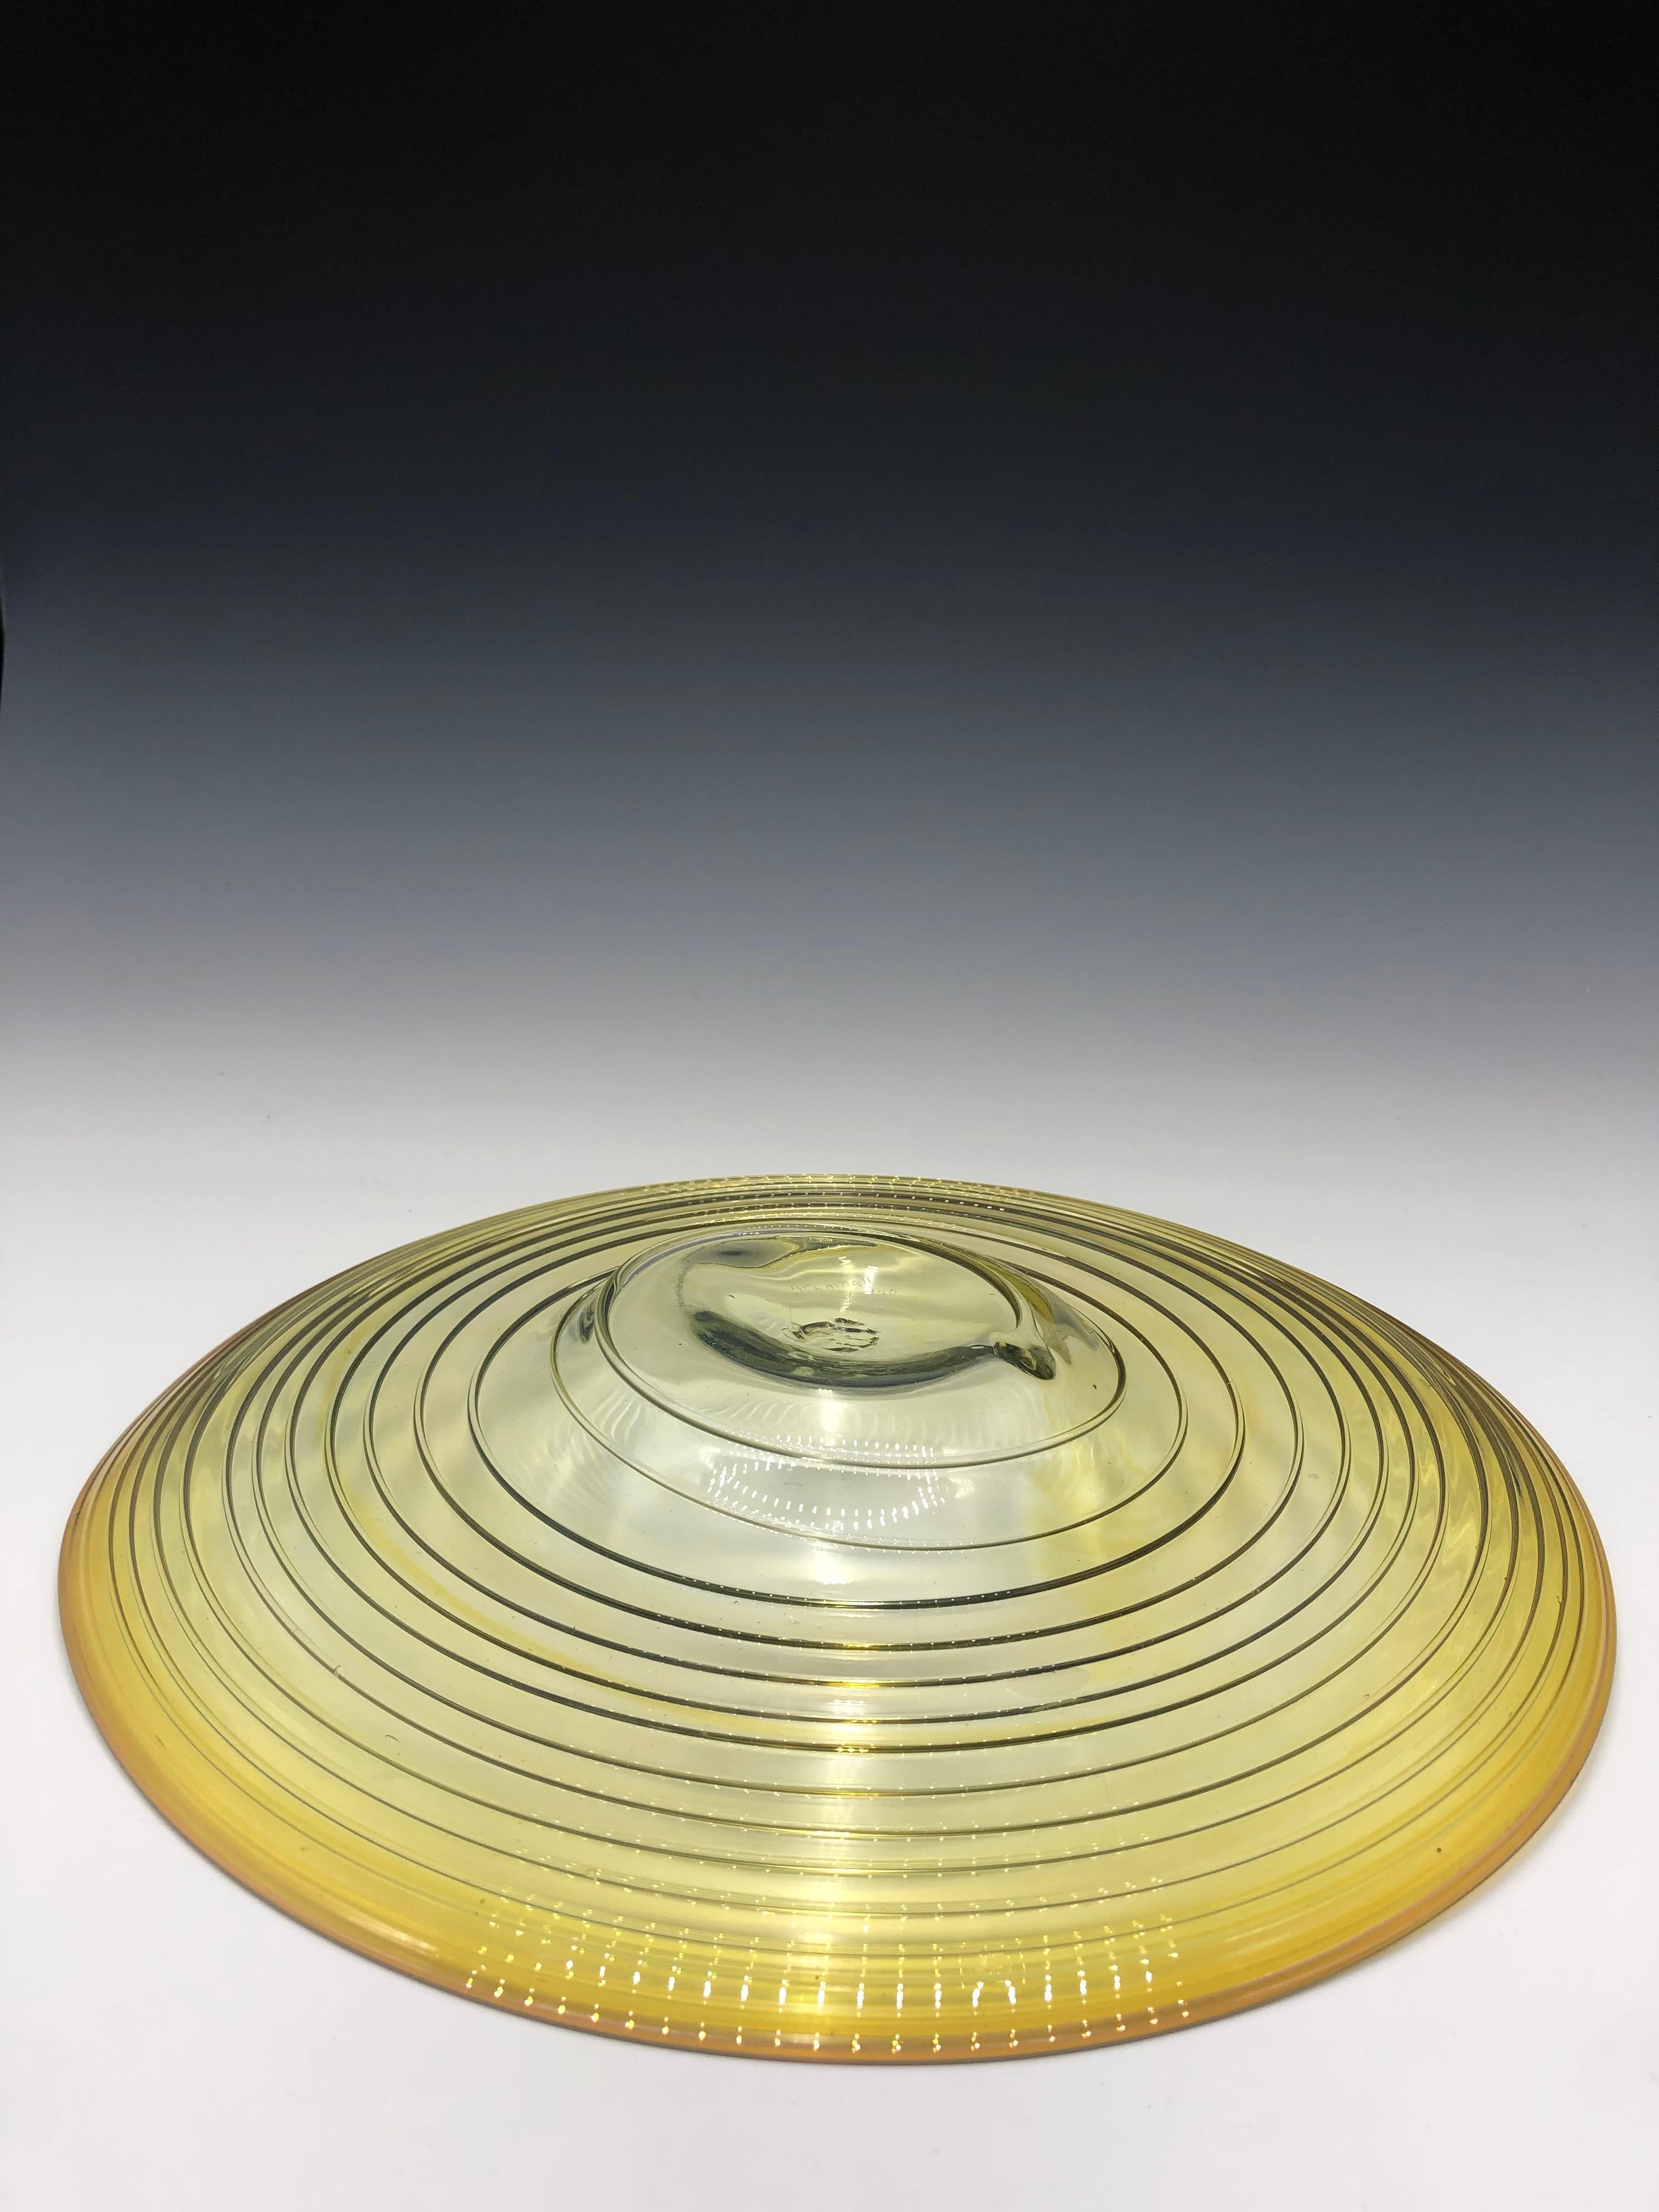 Vintage 1980s Hand Blown Studio Art Glass Plate by Peter Bramhall For Sale 4